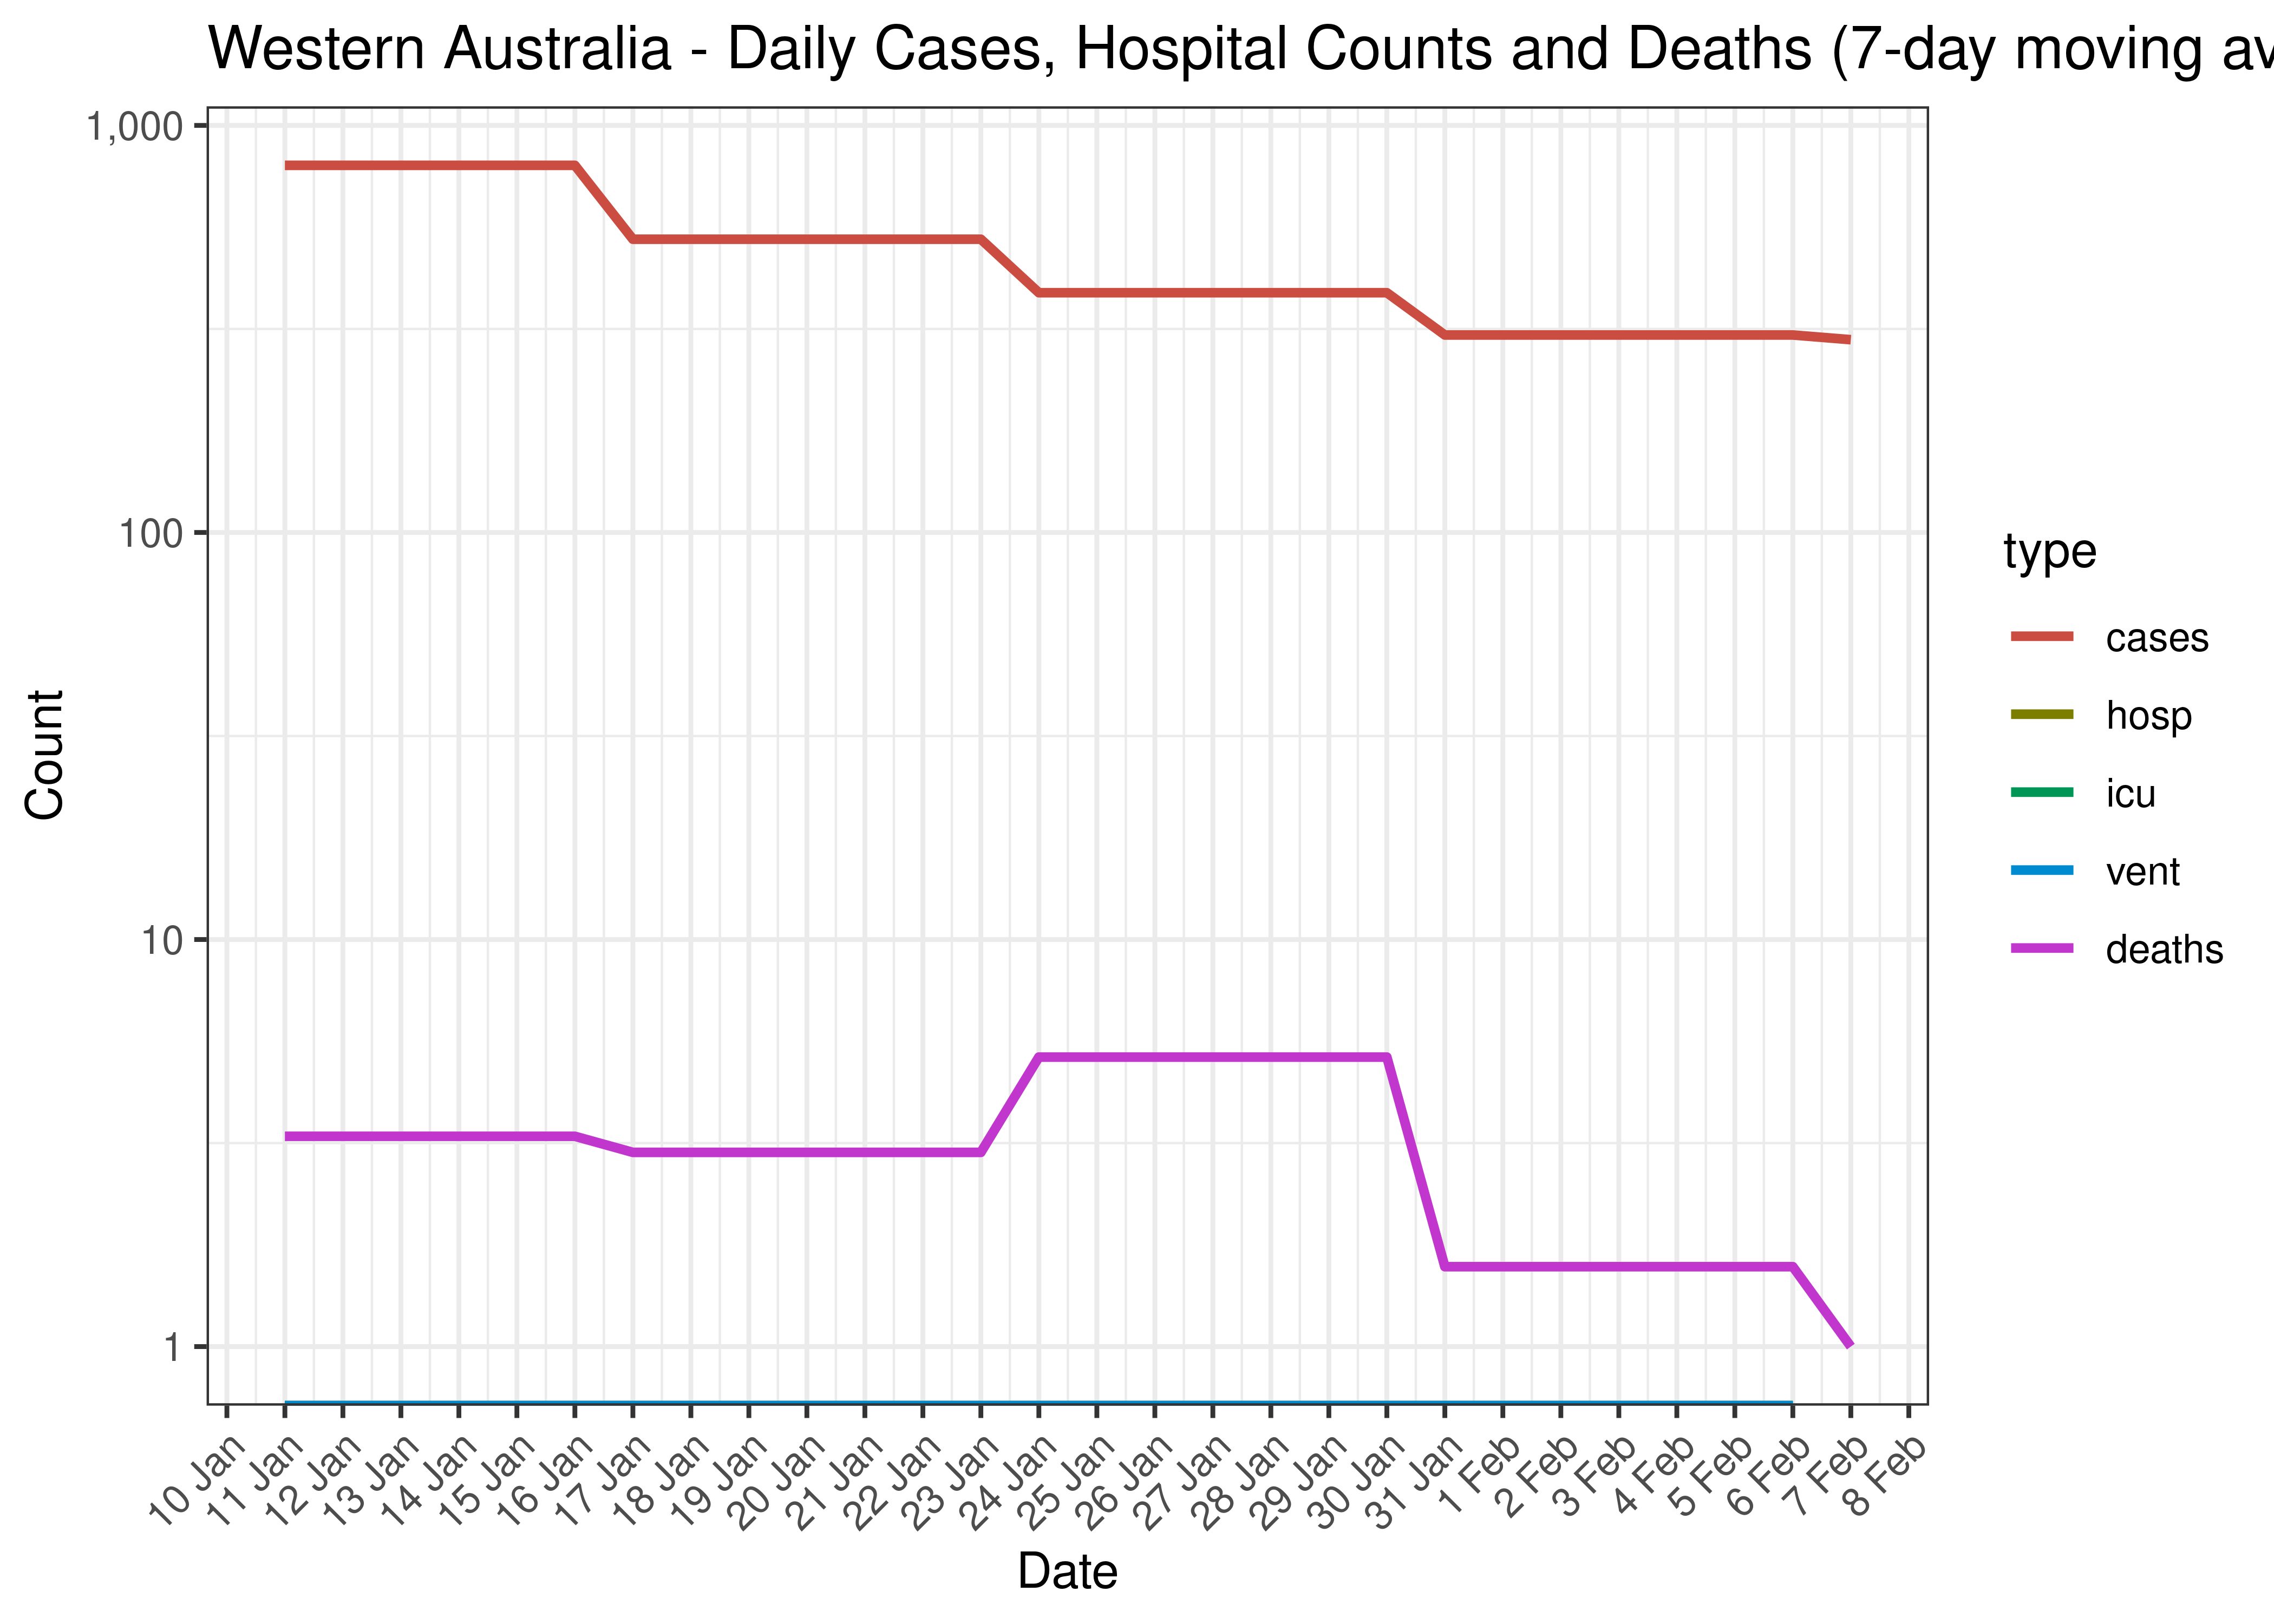 Western Australia - Daily Cases, Admissions and Deaths for Last 30-days (7-day moving average)